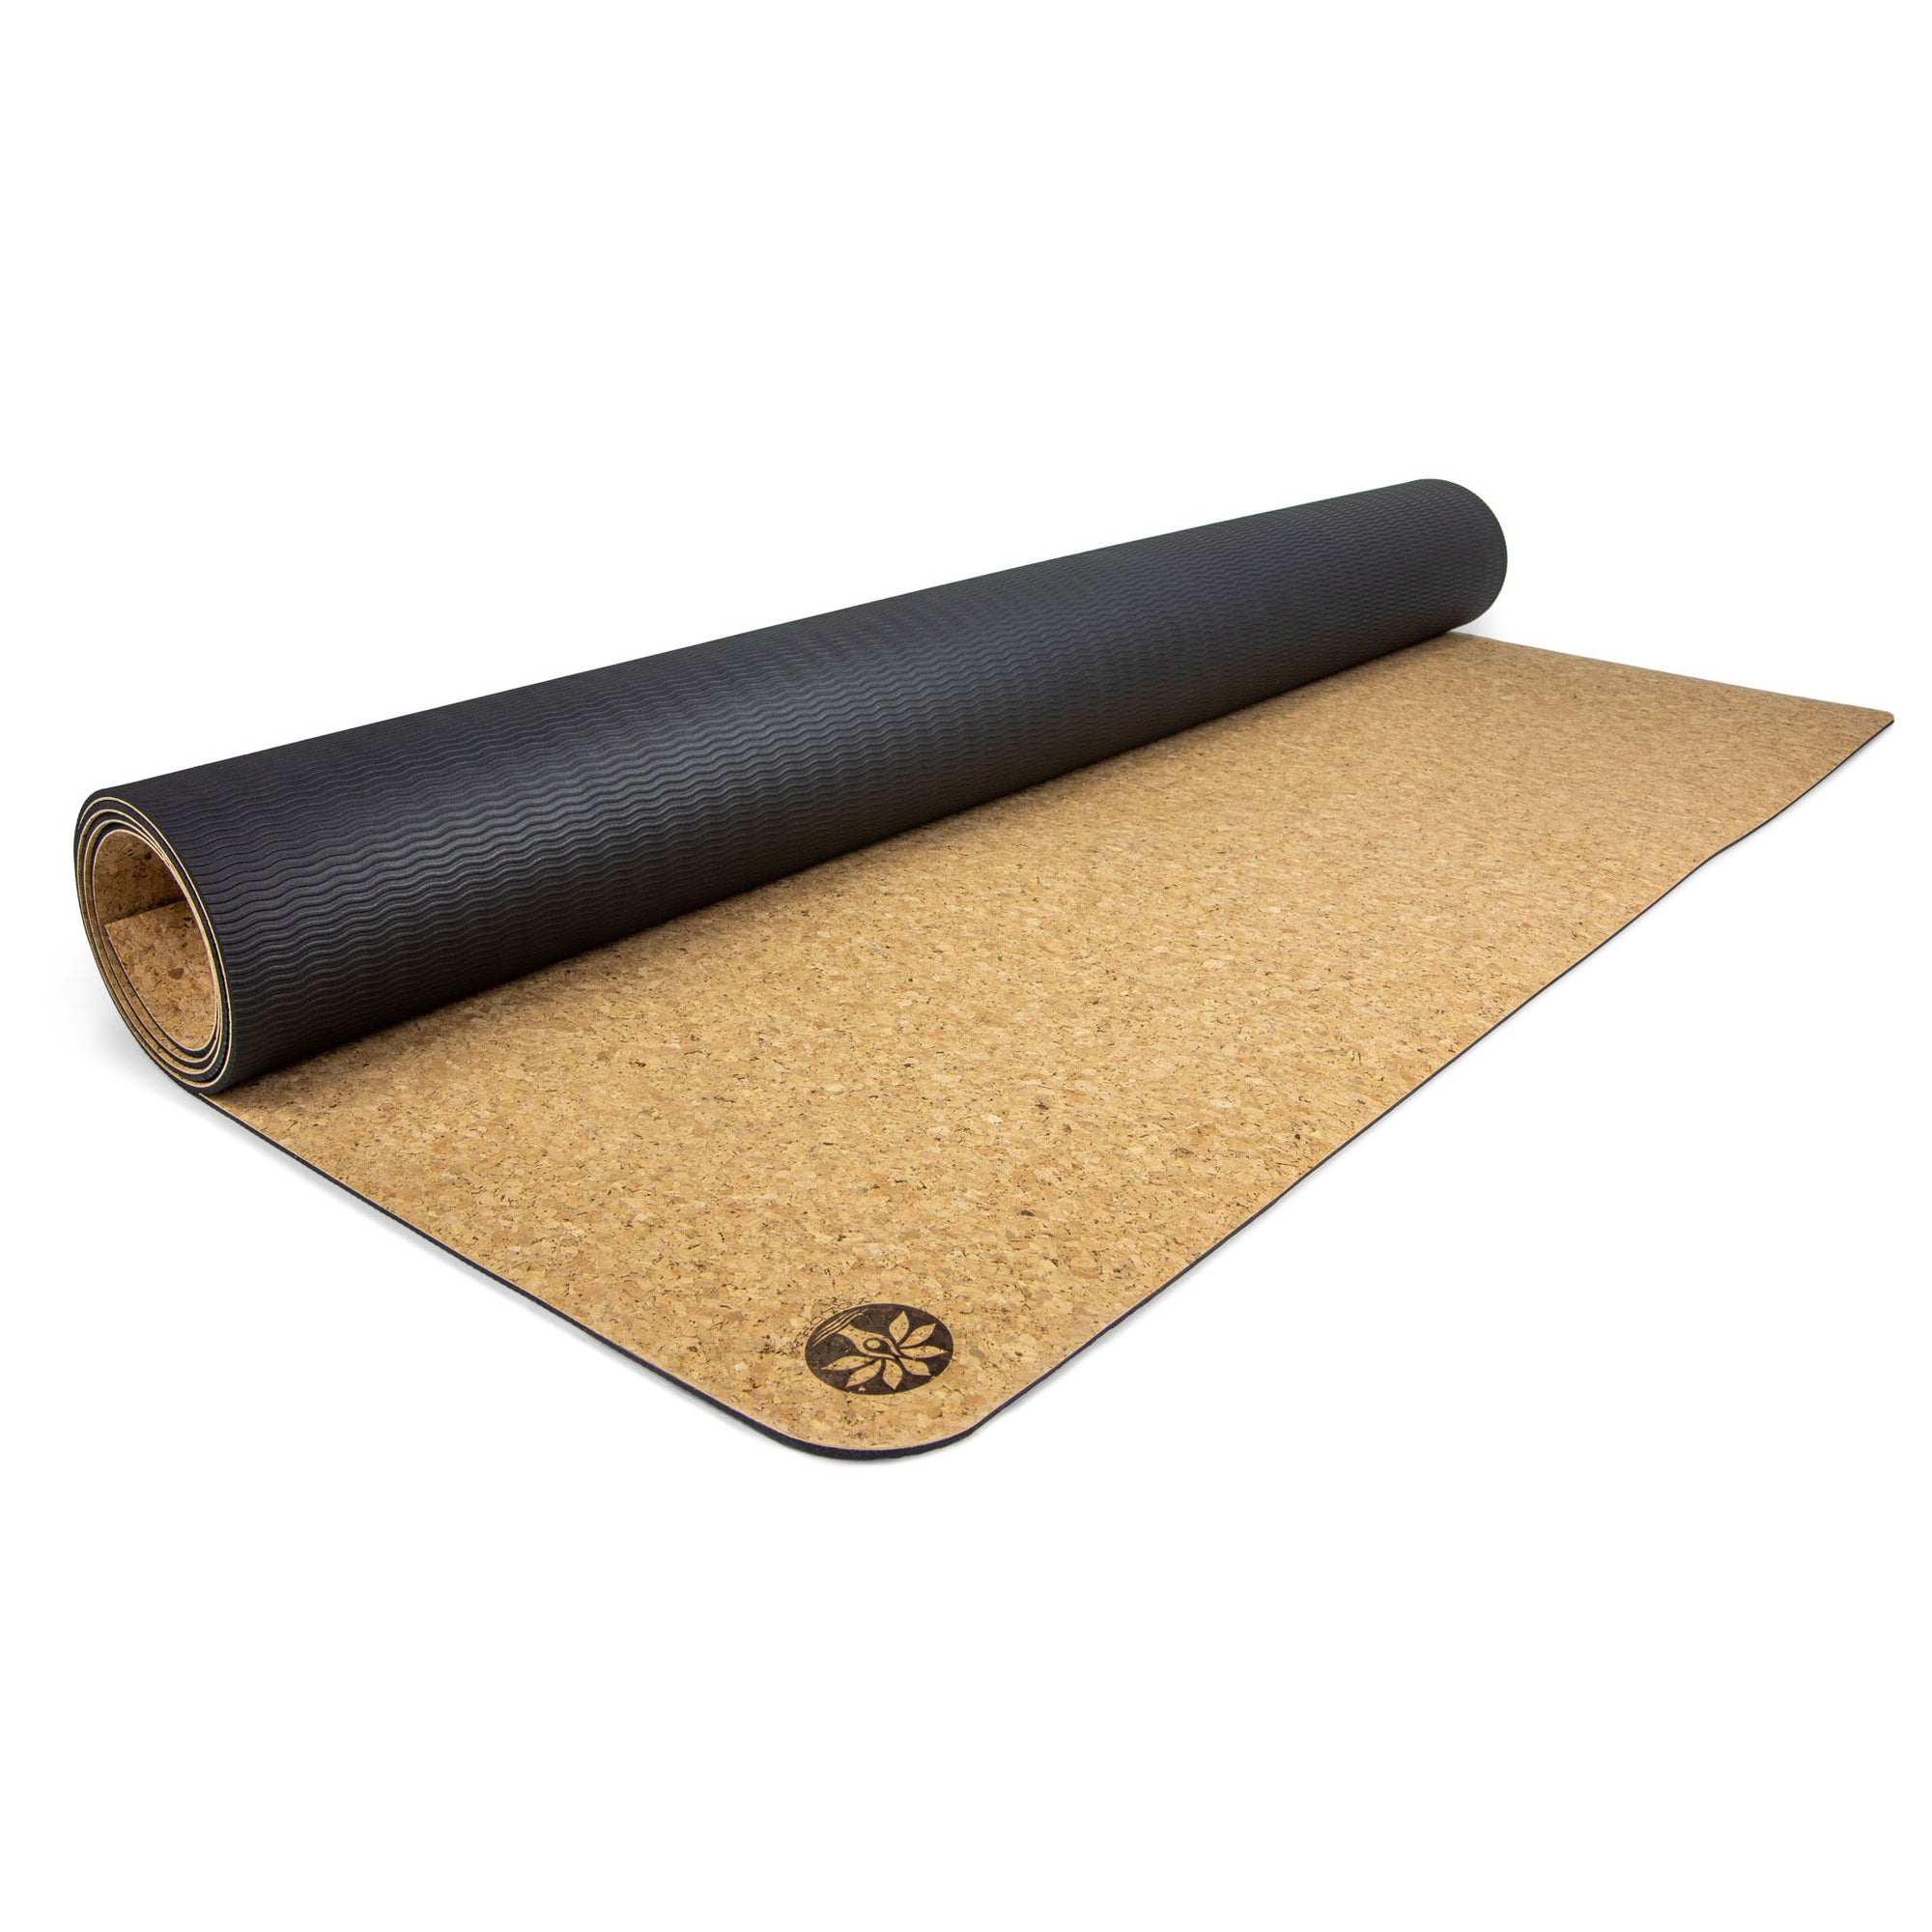 Cork Yoga Mats- Everything You Need To Know in 2022. - Charmed Yoga